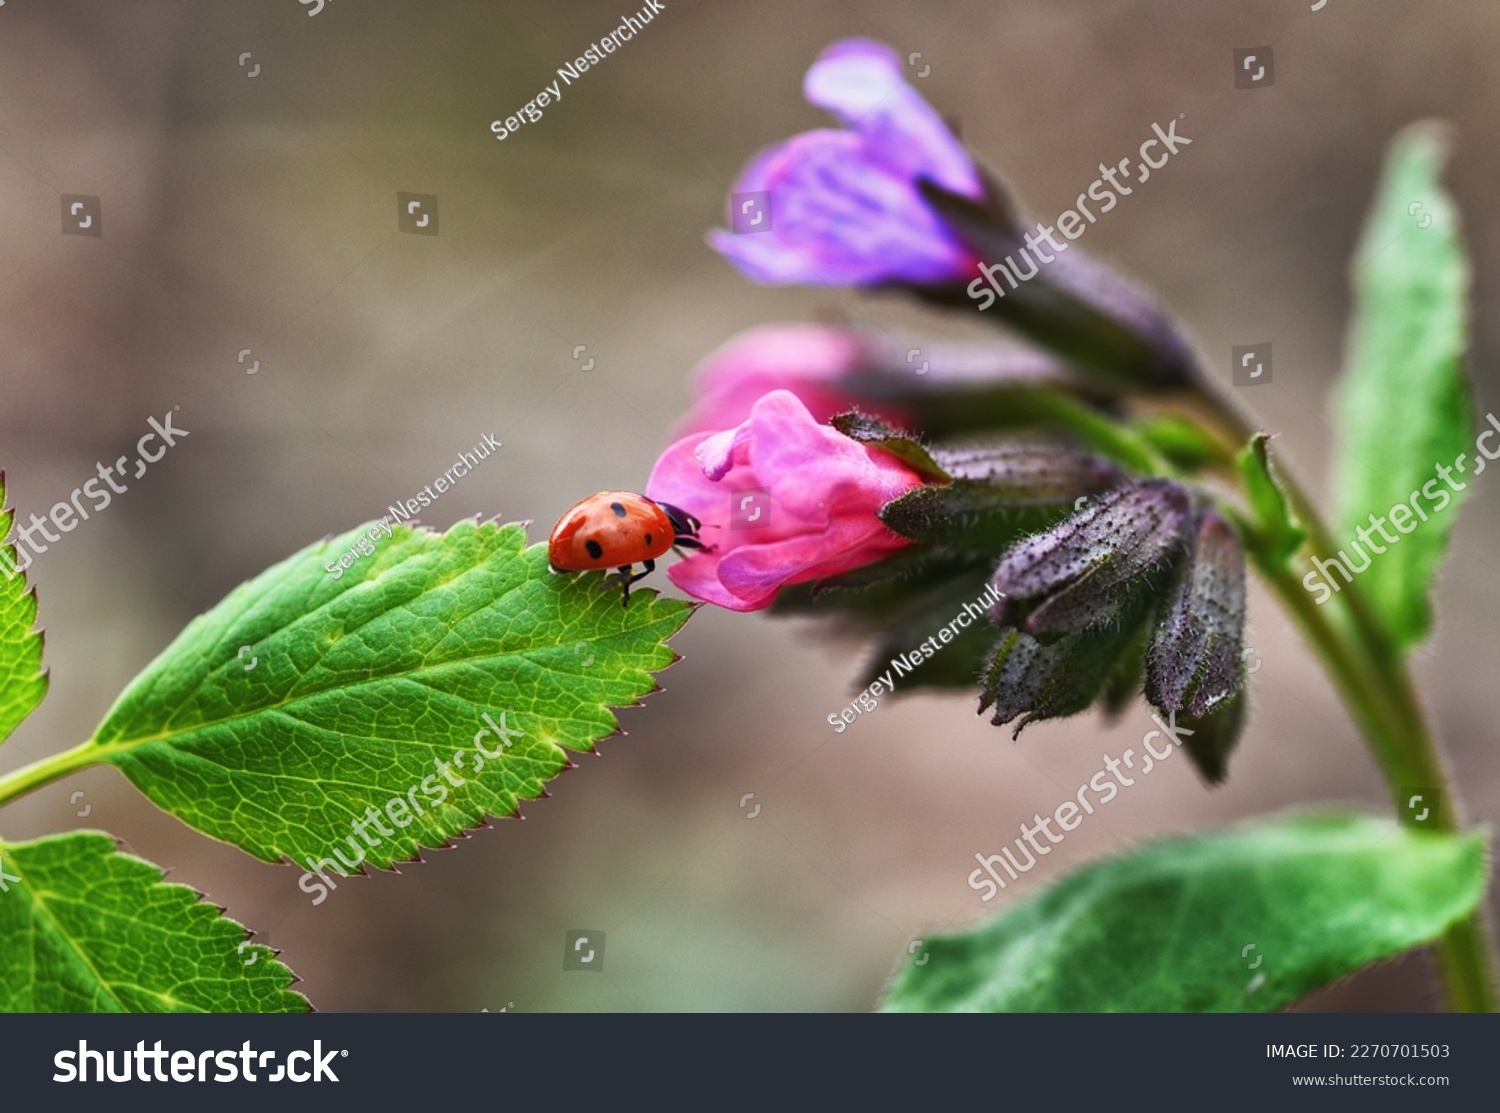 Macro photo of a ladybug on a flower. Spring nature #2270701503